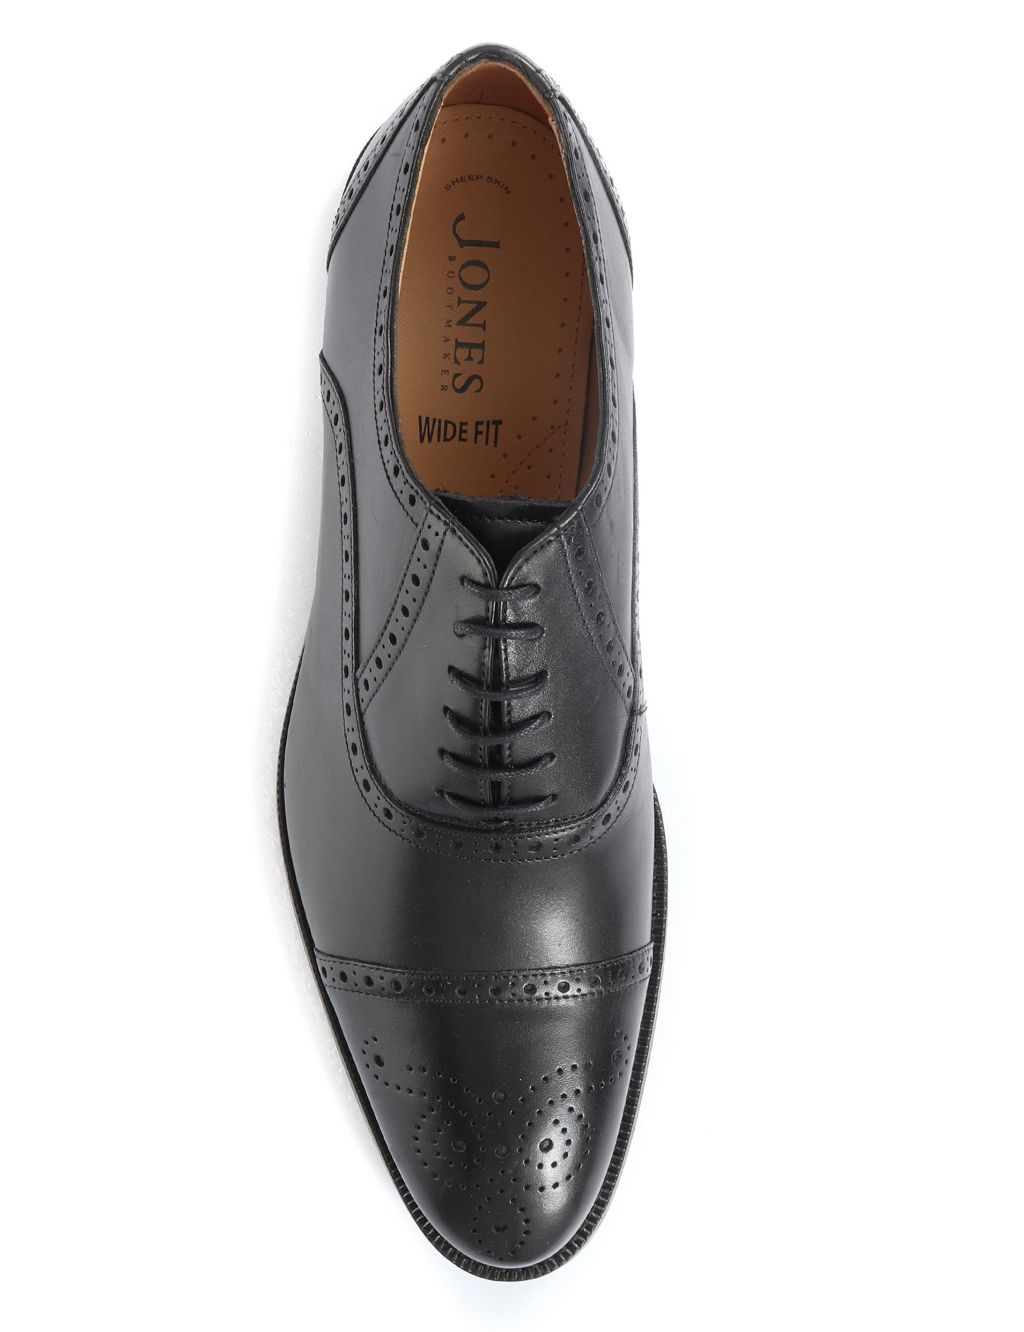 Wide Fit Leather Oxford Shoes image 3